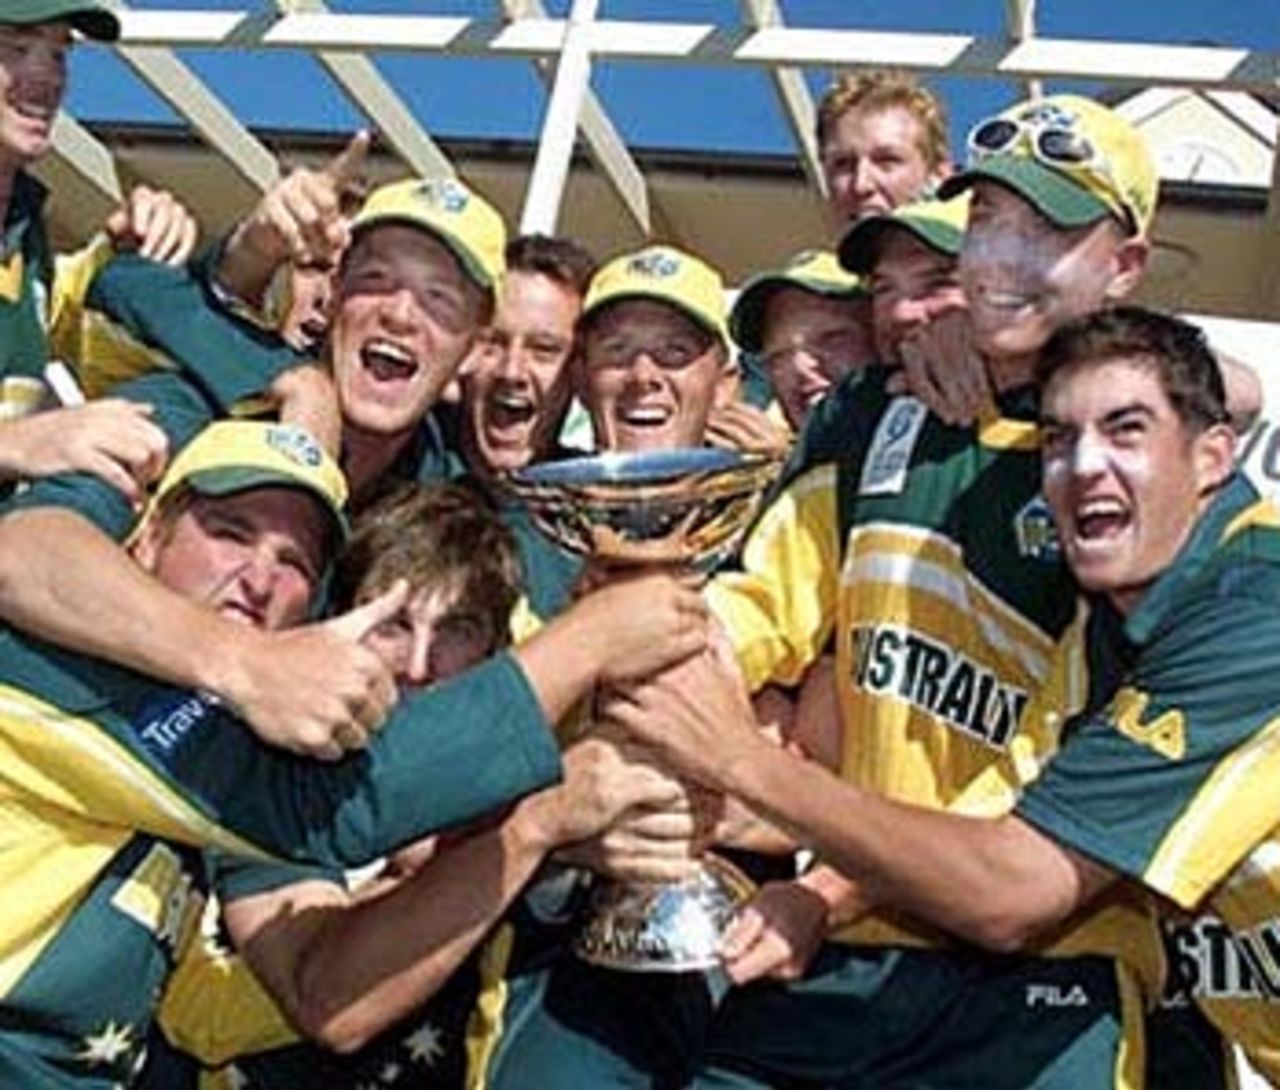 Australia Under-19 players celebrate with the ICC Under-19 World Cup trophy. ICC Under-19 World Cup Super League Final: Australia Under-19s v South Africa Under-19s at Bert Sutcliffe Oval, Lincoln, 9 February 2002.